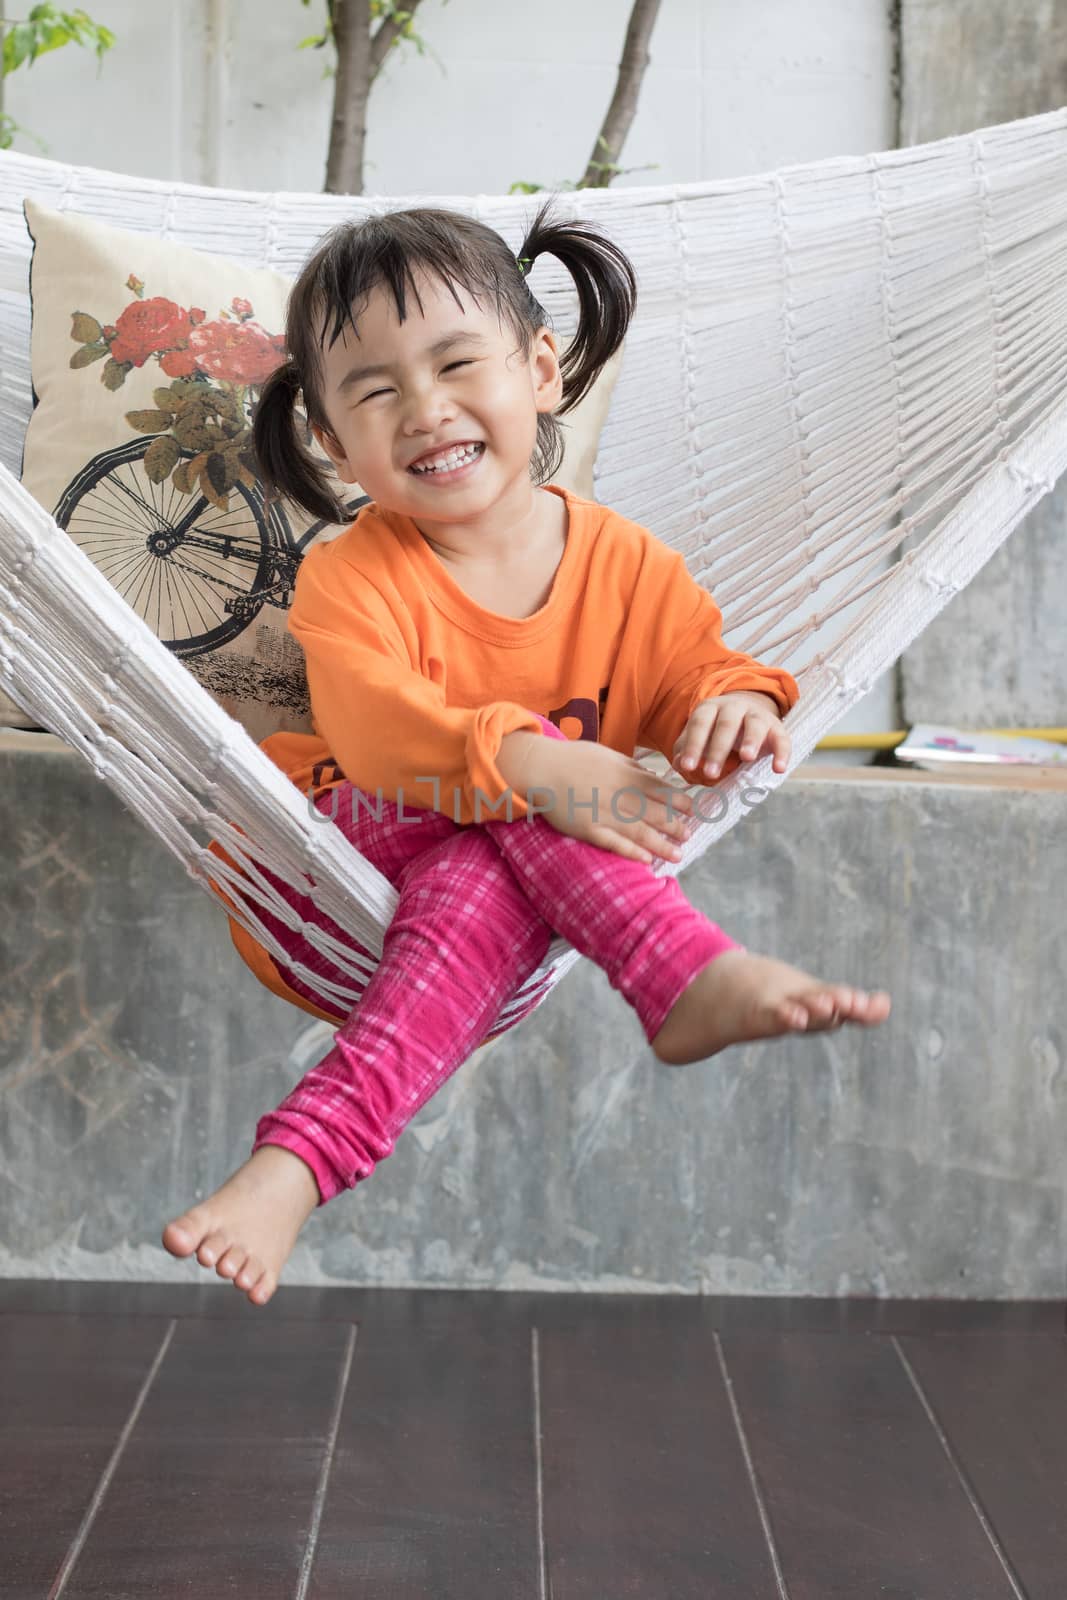 portrait of children toothy smiling and relaxing in clothes cradle at home living terrace